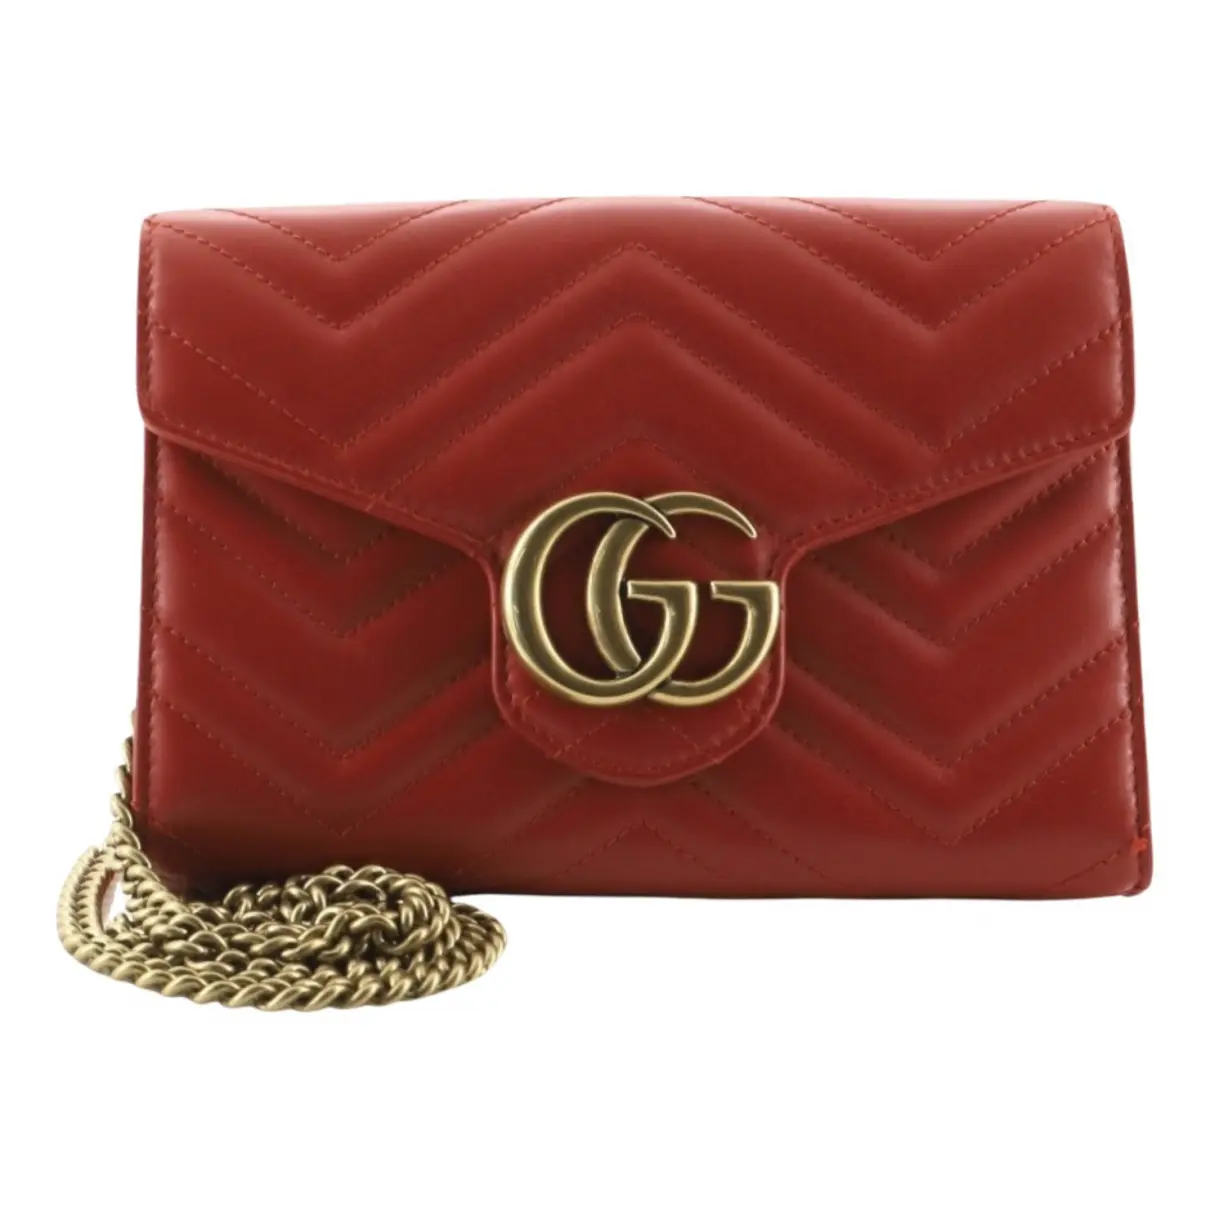 Pearly GG Marmont Chain Wallet leather crossbody bag Gucci